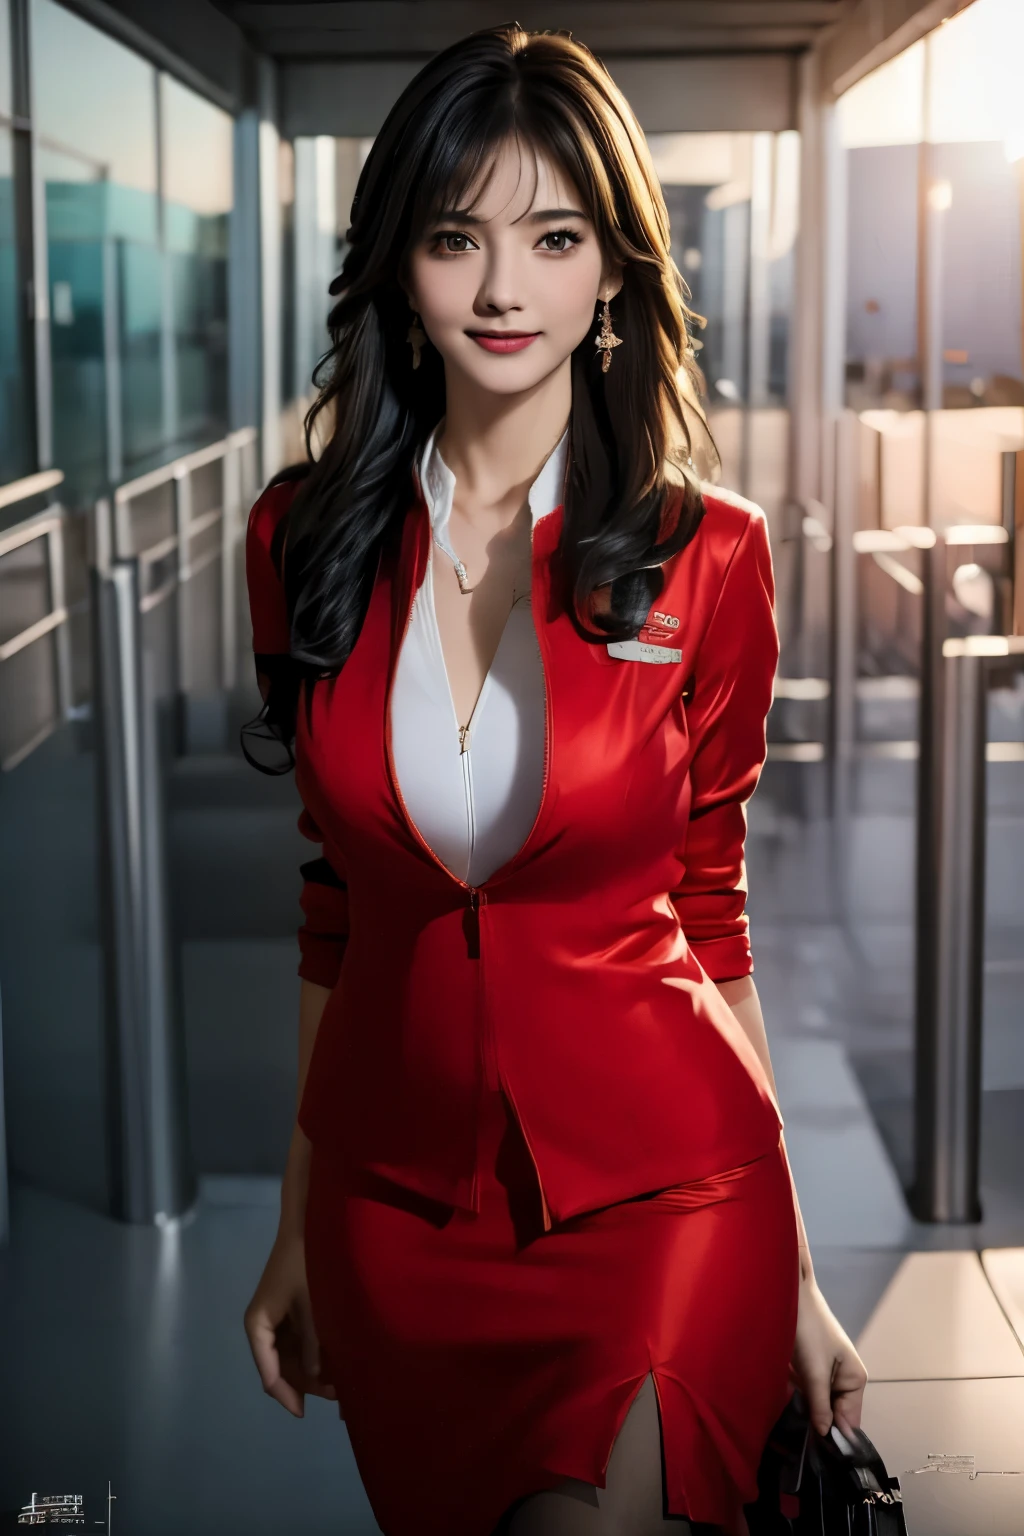 (masterpiece:1.2, highest quality:1.2), 32k HDR, High resolution, (alone, 1 girl), （Ultra-realistic portrait of an AirAsia stewardess in uniform）, neat woman, beautiful face, dark brown hair, (long hair down to waist), (red jacket:1.1, Unzipped jacket, unbuttoned white shirt:1.05, red mini skirt:1.1, pantyhose), perfect slim body:1.1, huge breasts, huge breasts cleavage, show cleavage、detailed skin texture, fine eyes, (smile:1.2), necklace、earrings、(Realistic airport, Kansai International Airport, bright lighting),blue eyes、long shot